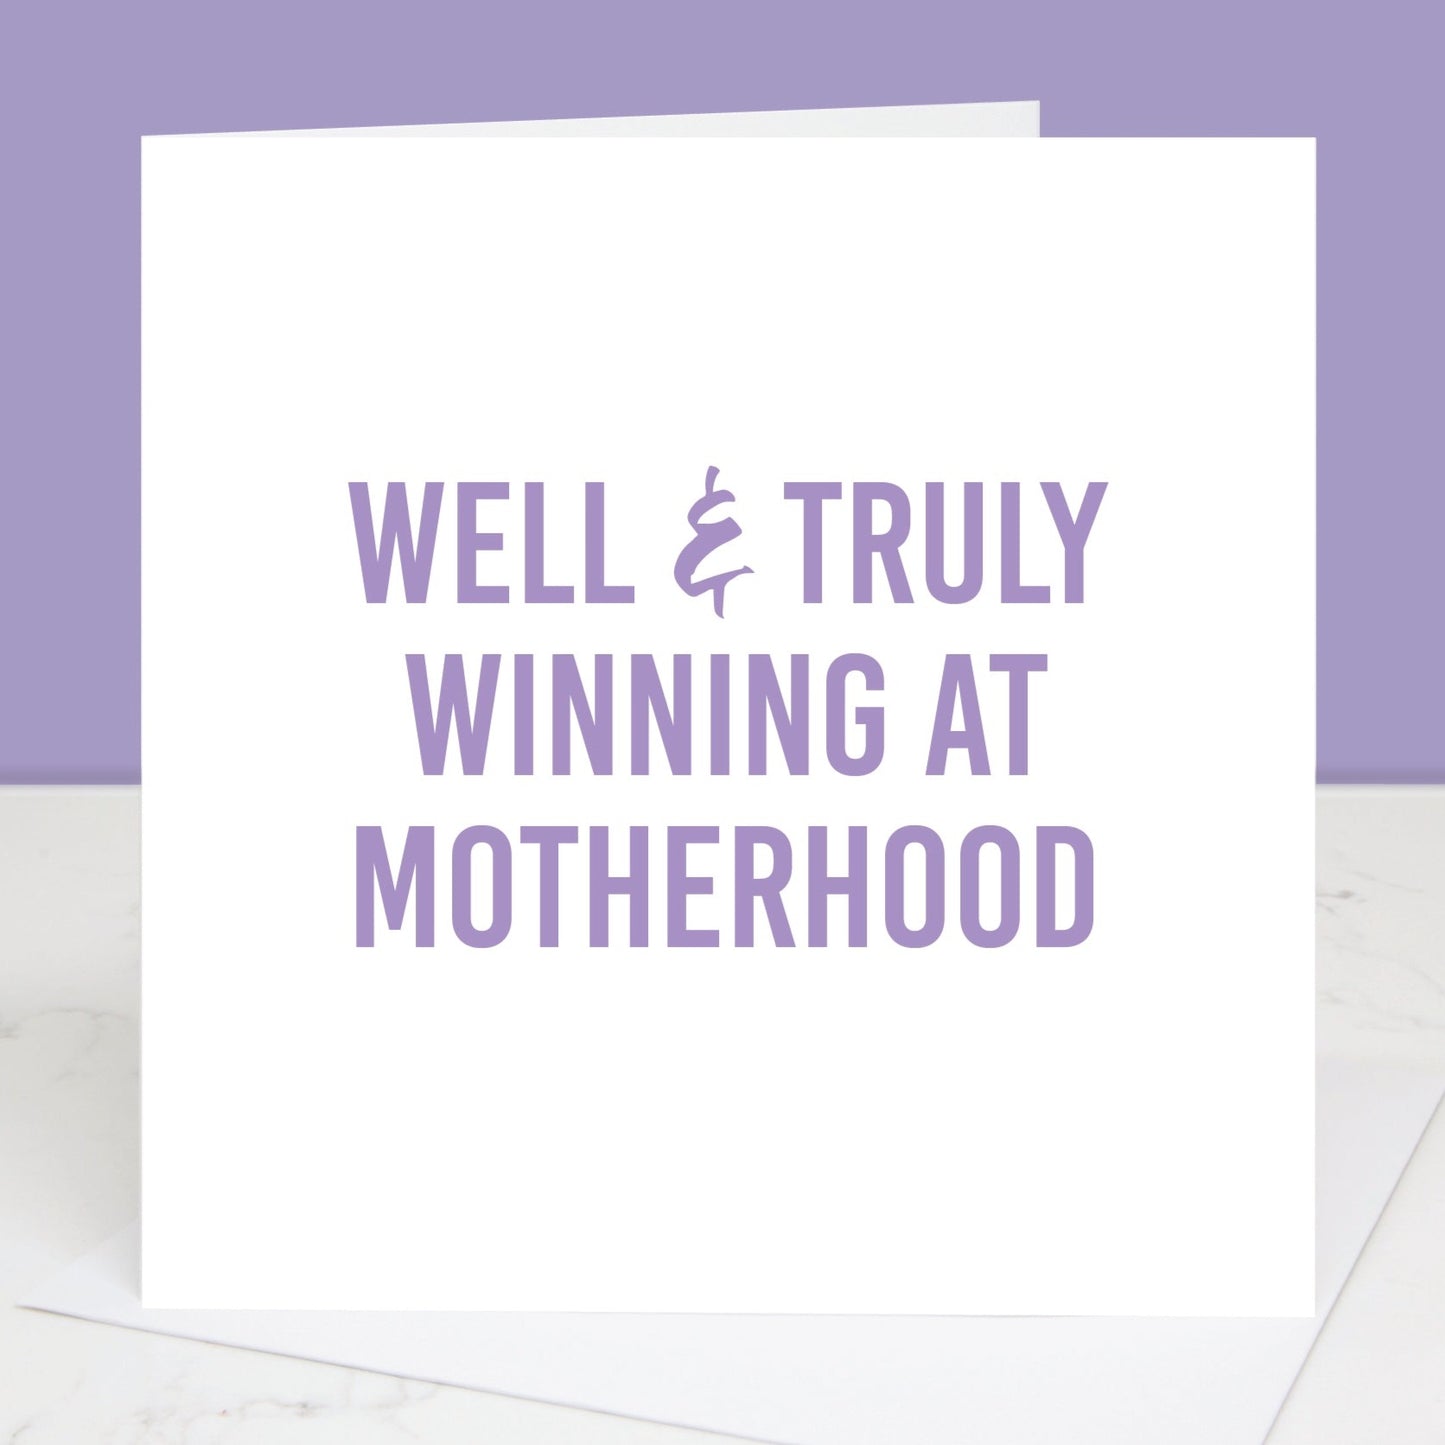 Well & truly winning at motherhood Mother's Day cardAll images and designs © Slice of Pie Designs